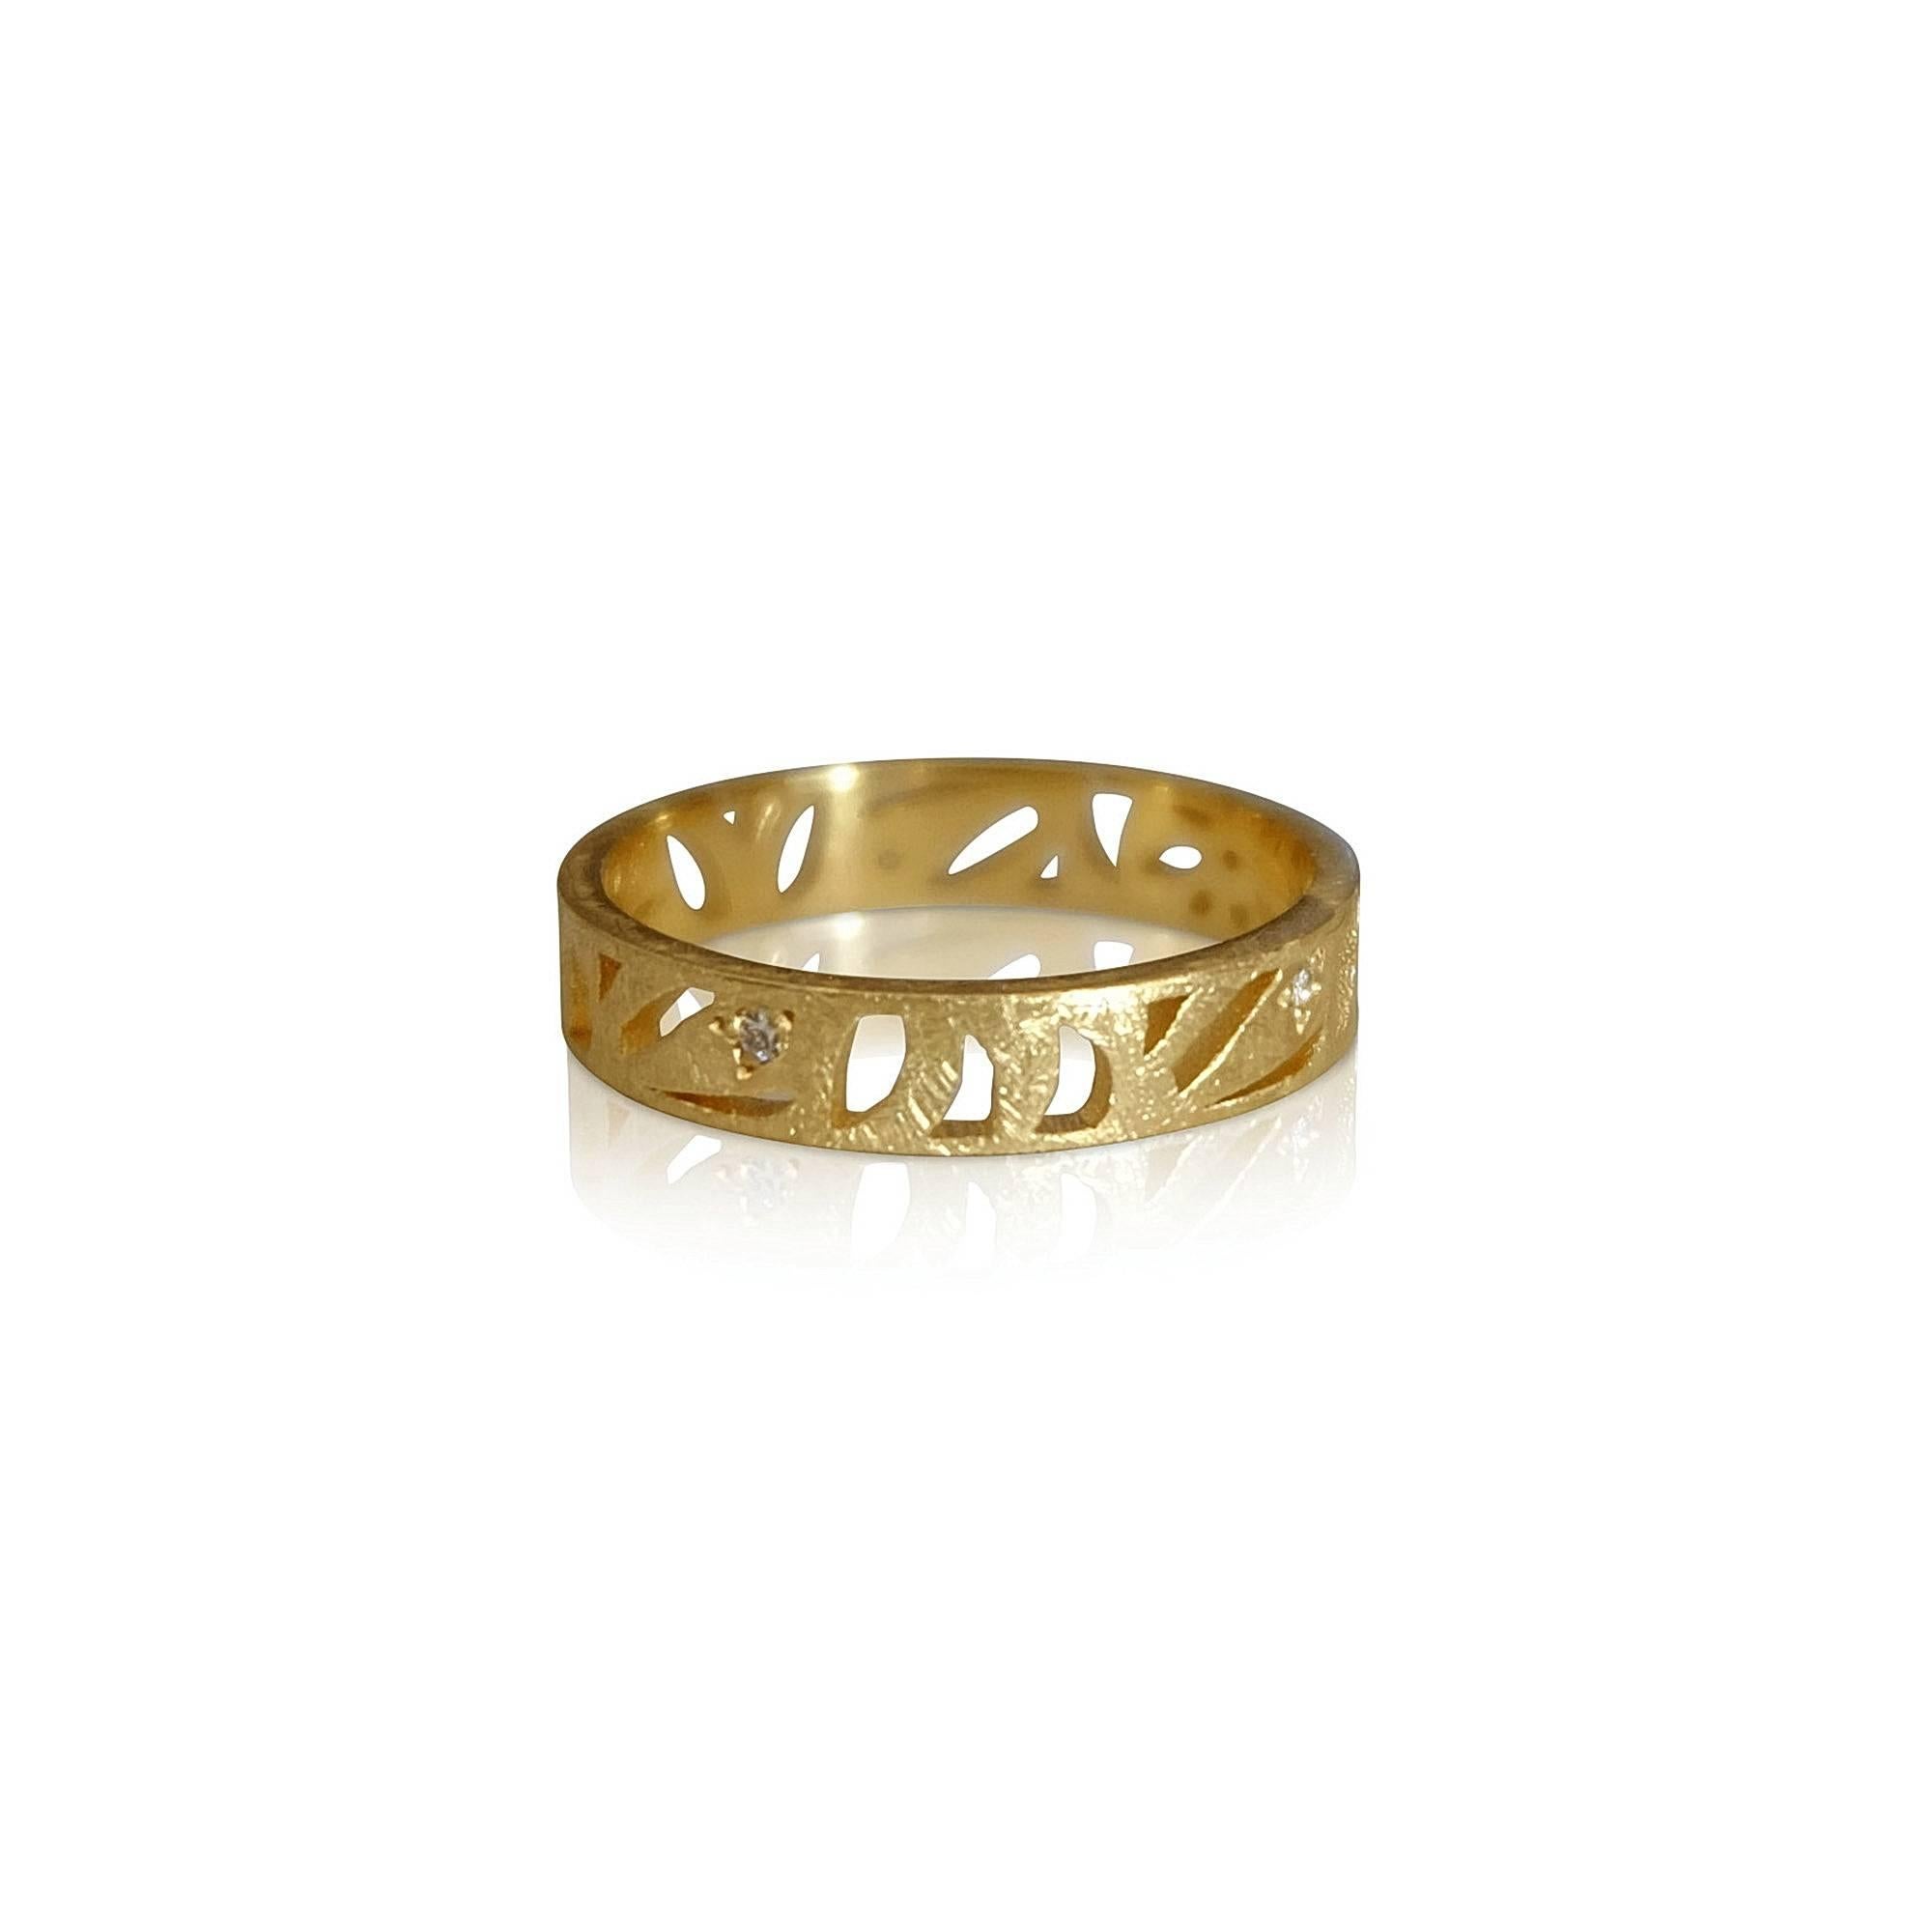 Luca Jouel Diamond Floral Motif Ring in Yellow Gold In New Condition For Sale In South Perth, AU